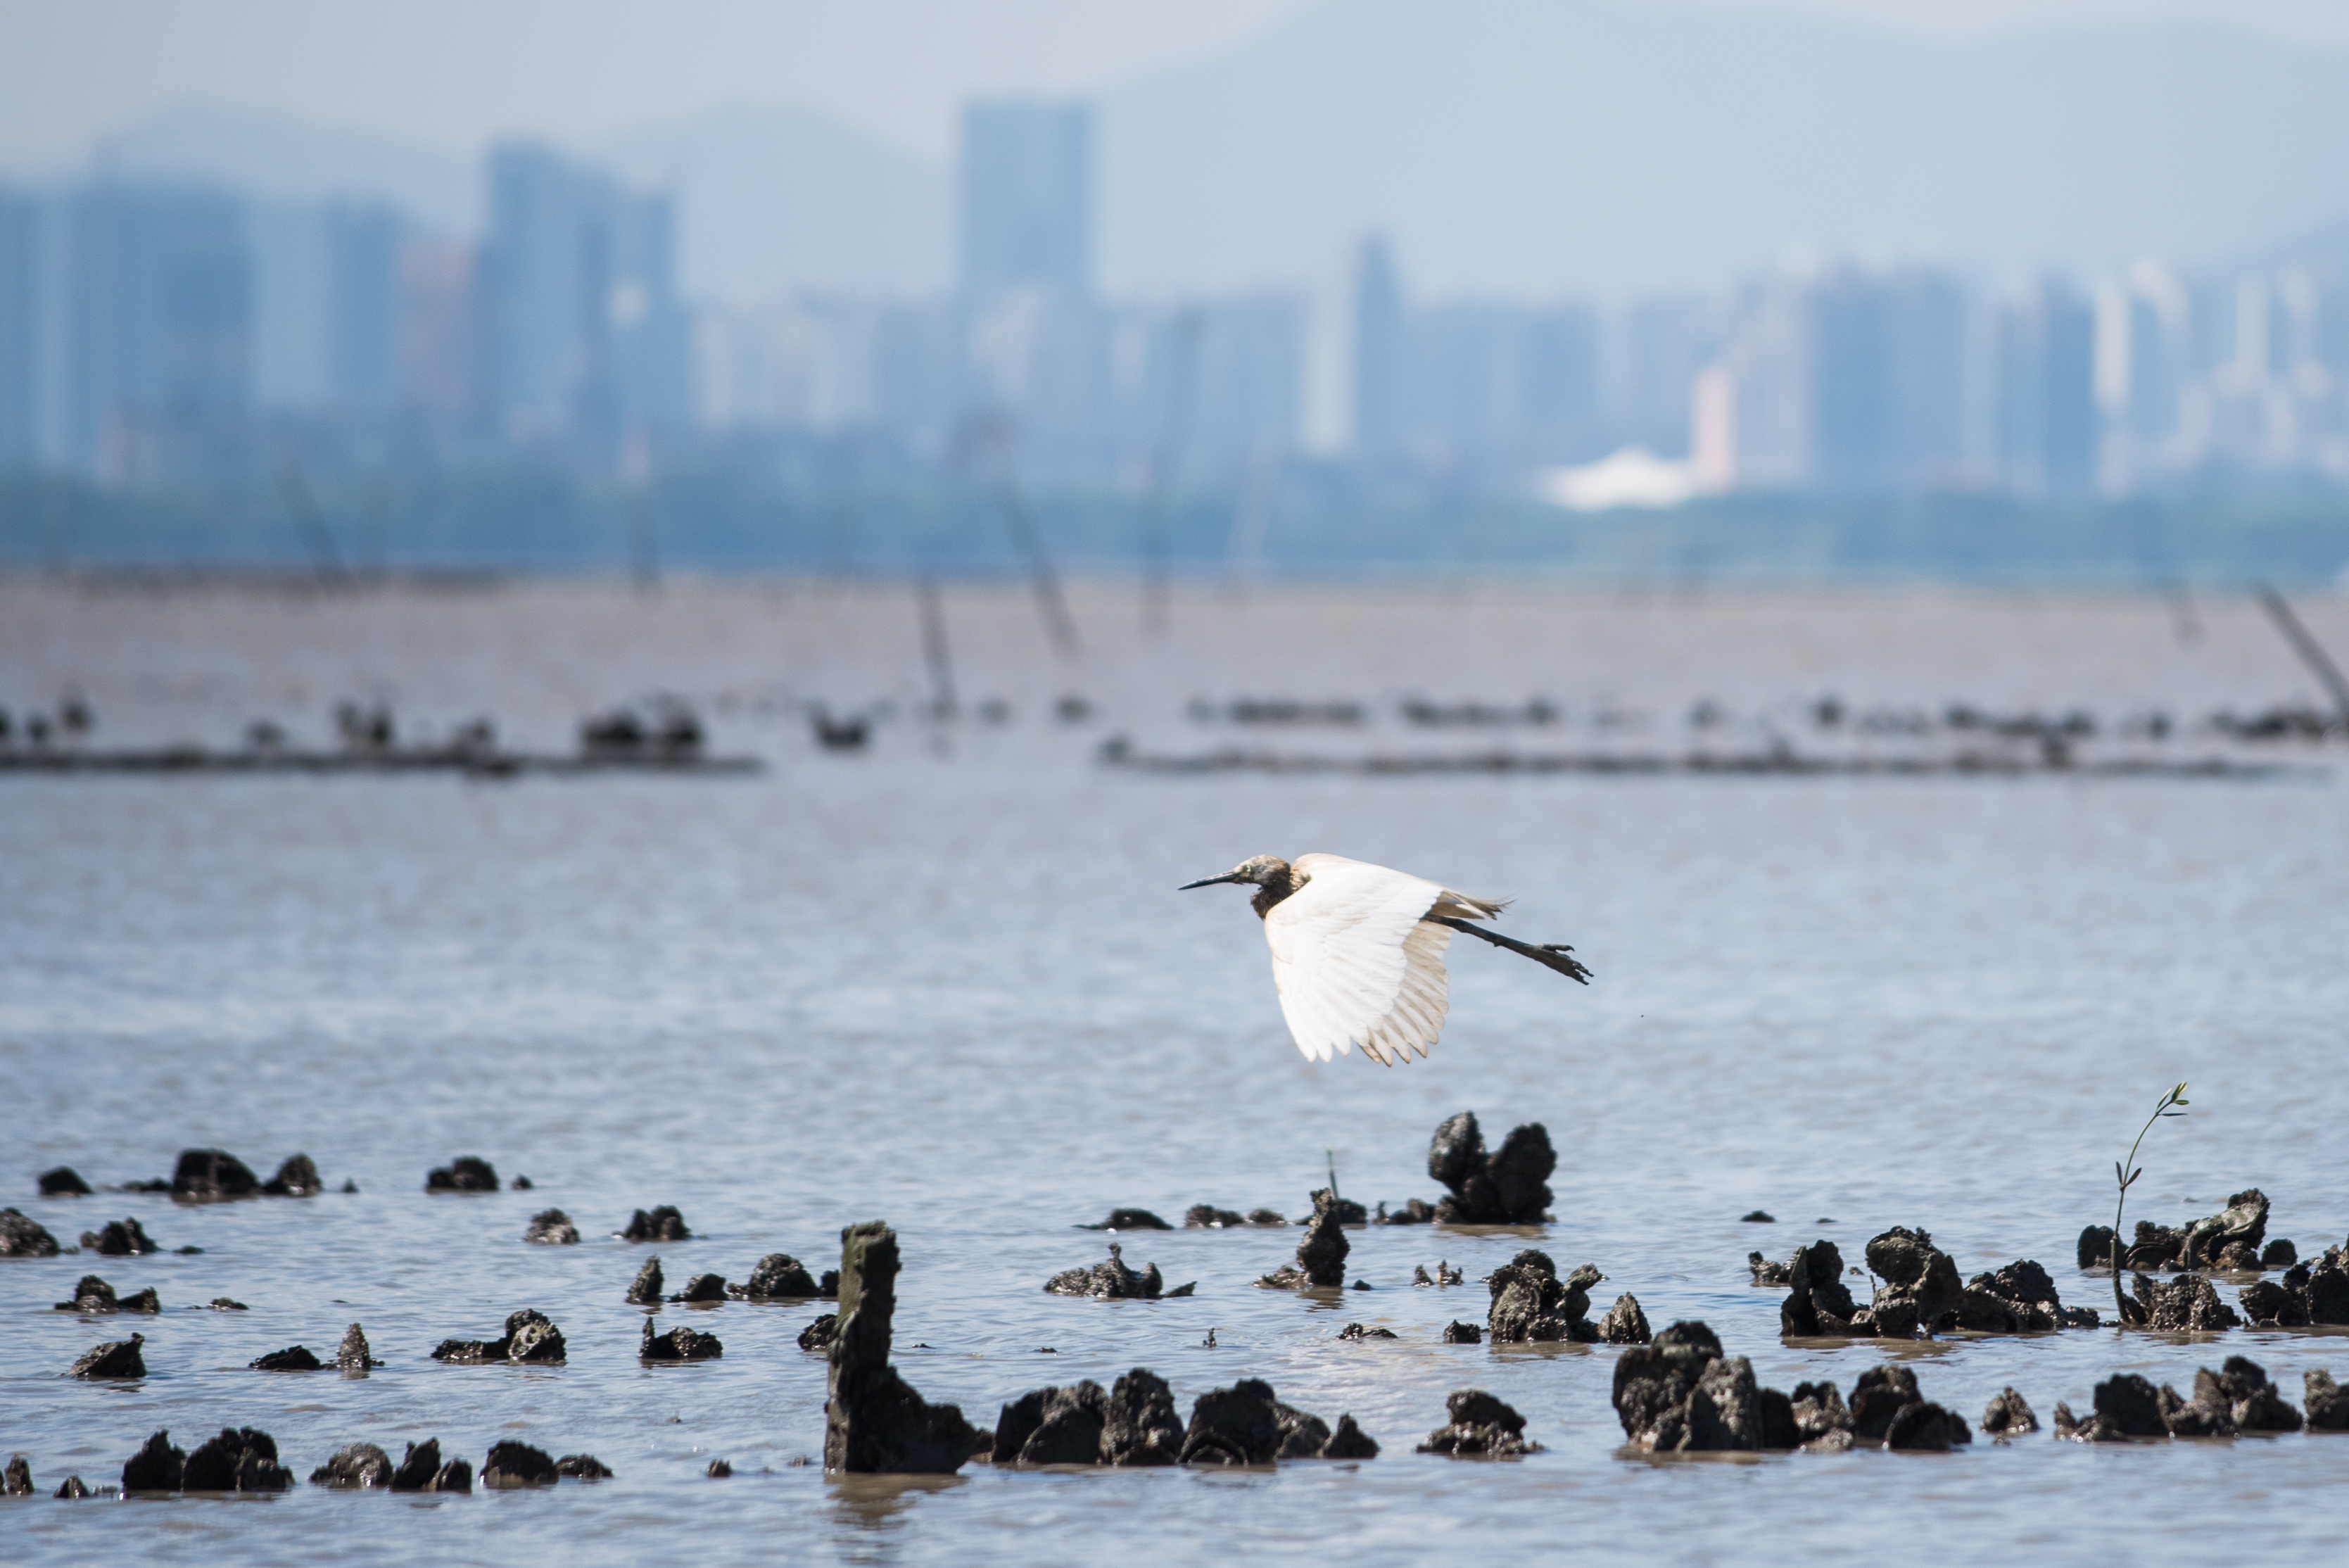 A white waterbird flies over a body of water with oyster shells poking out.